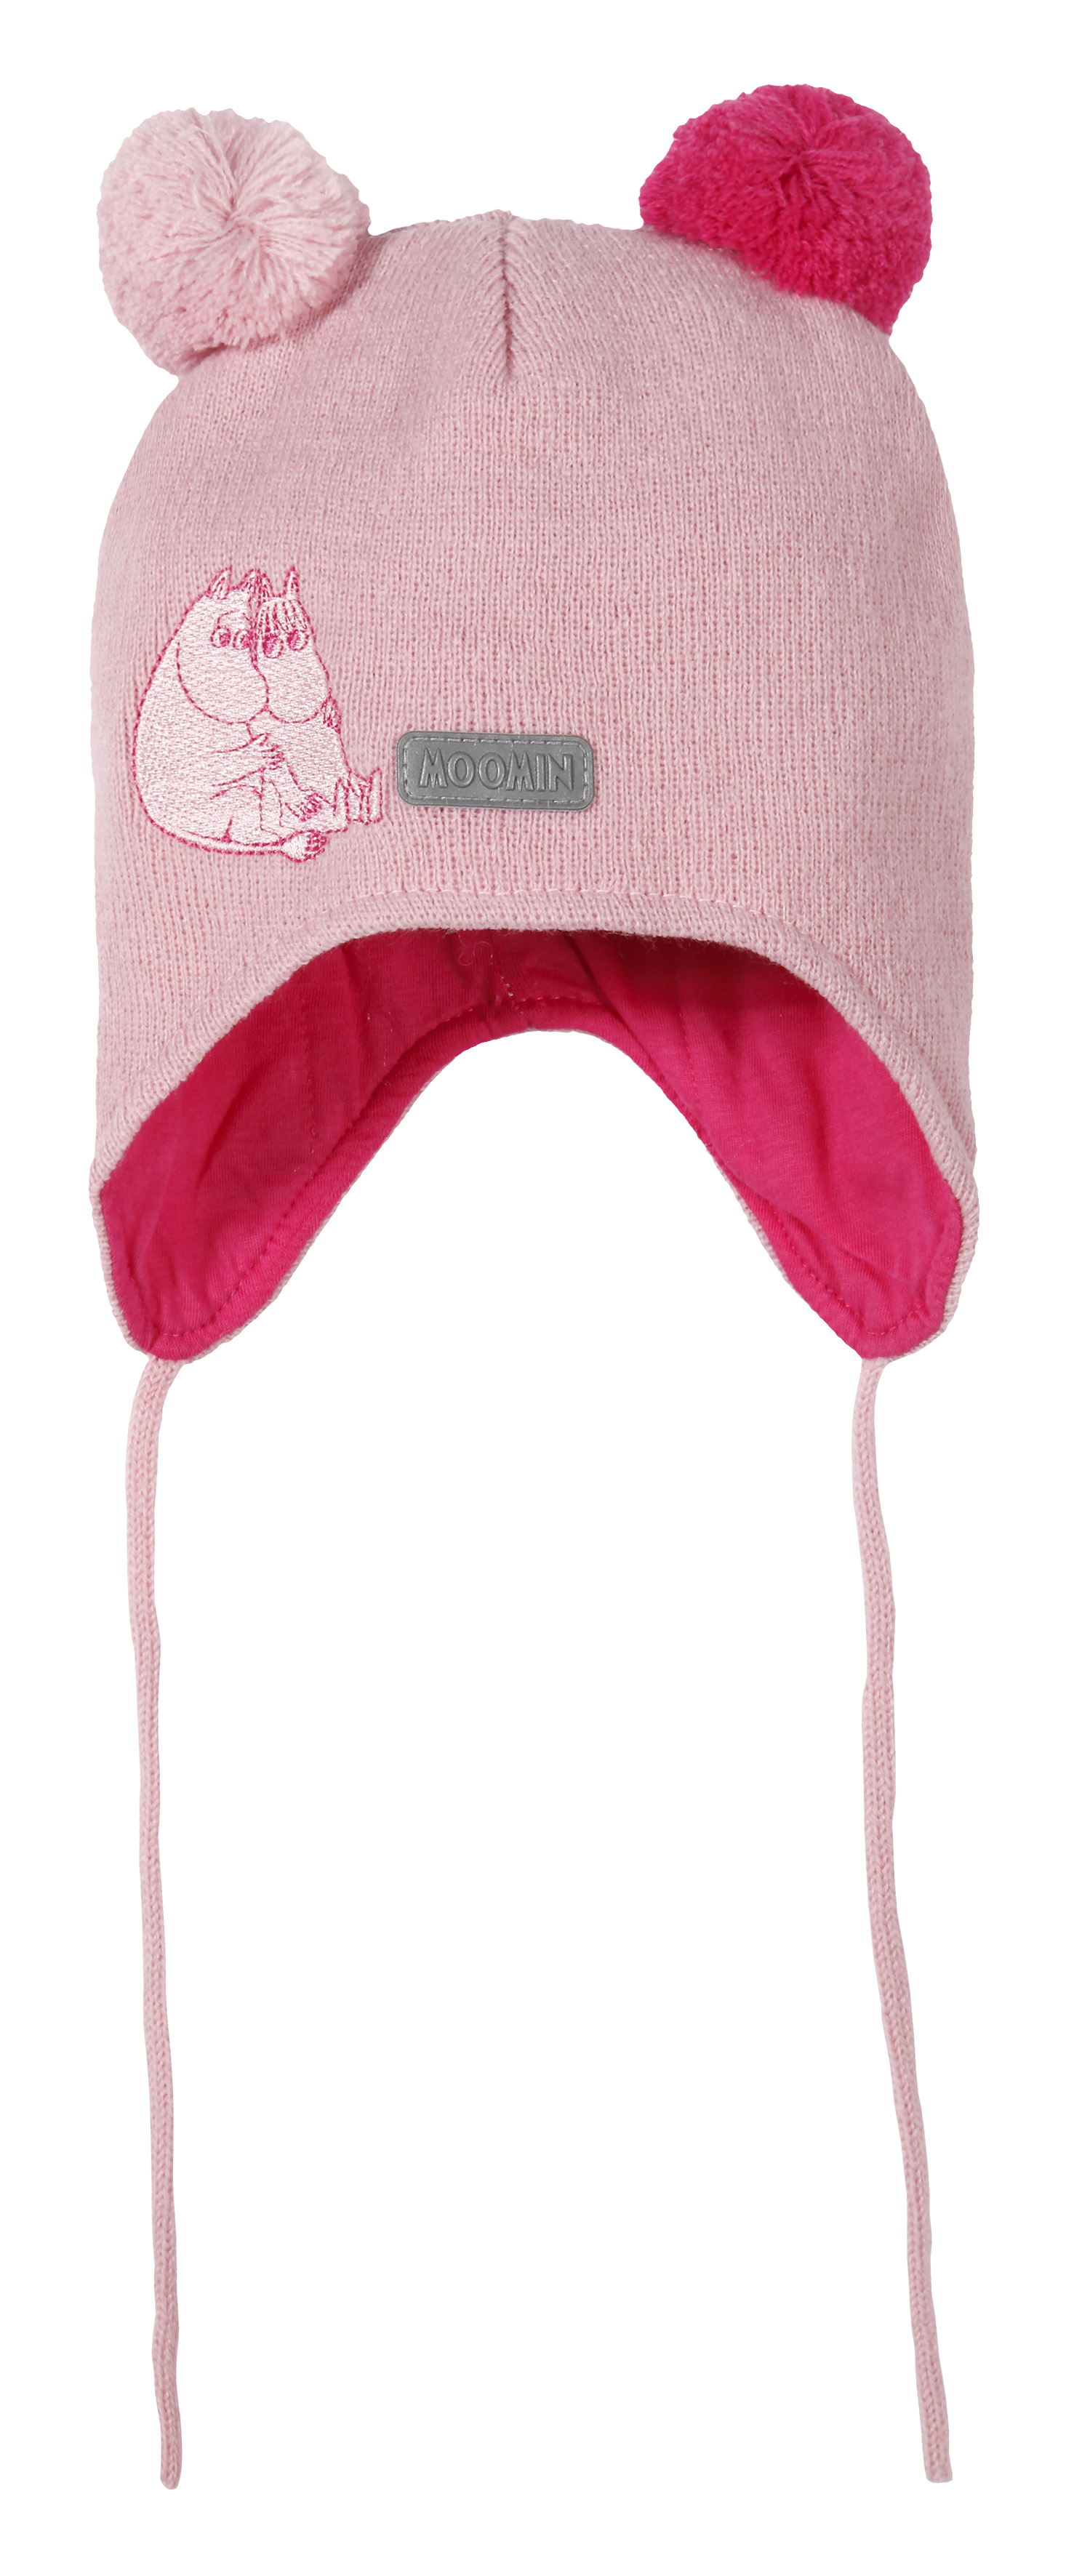 L-Fashion Group Oy - Babies knitted hat- girls